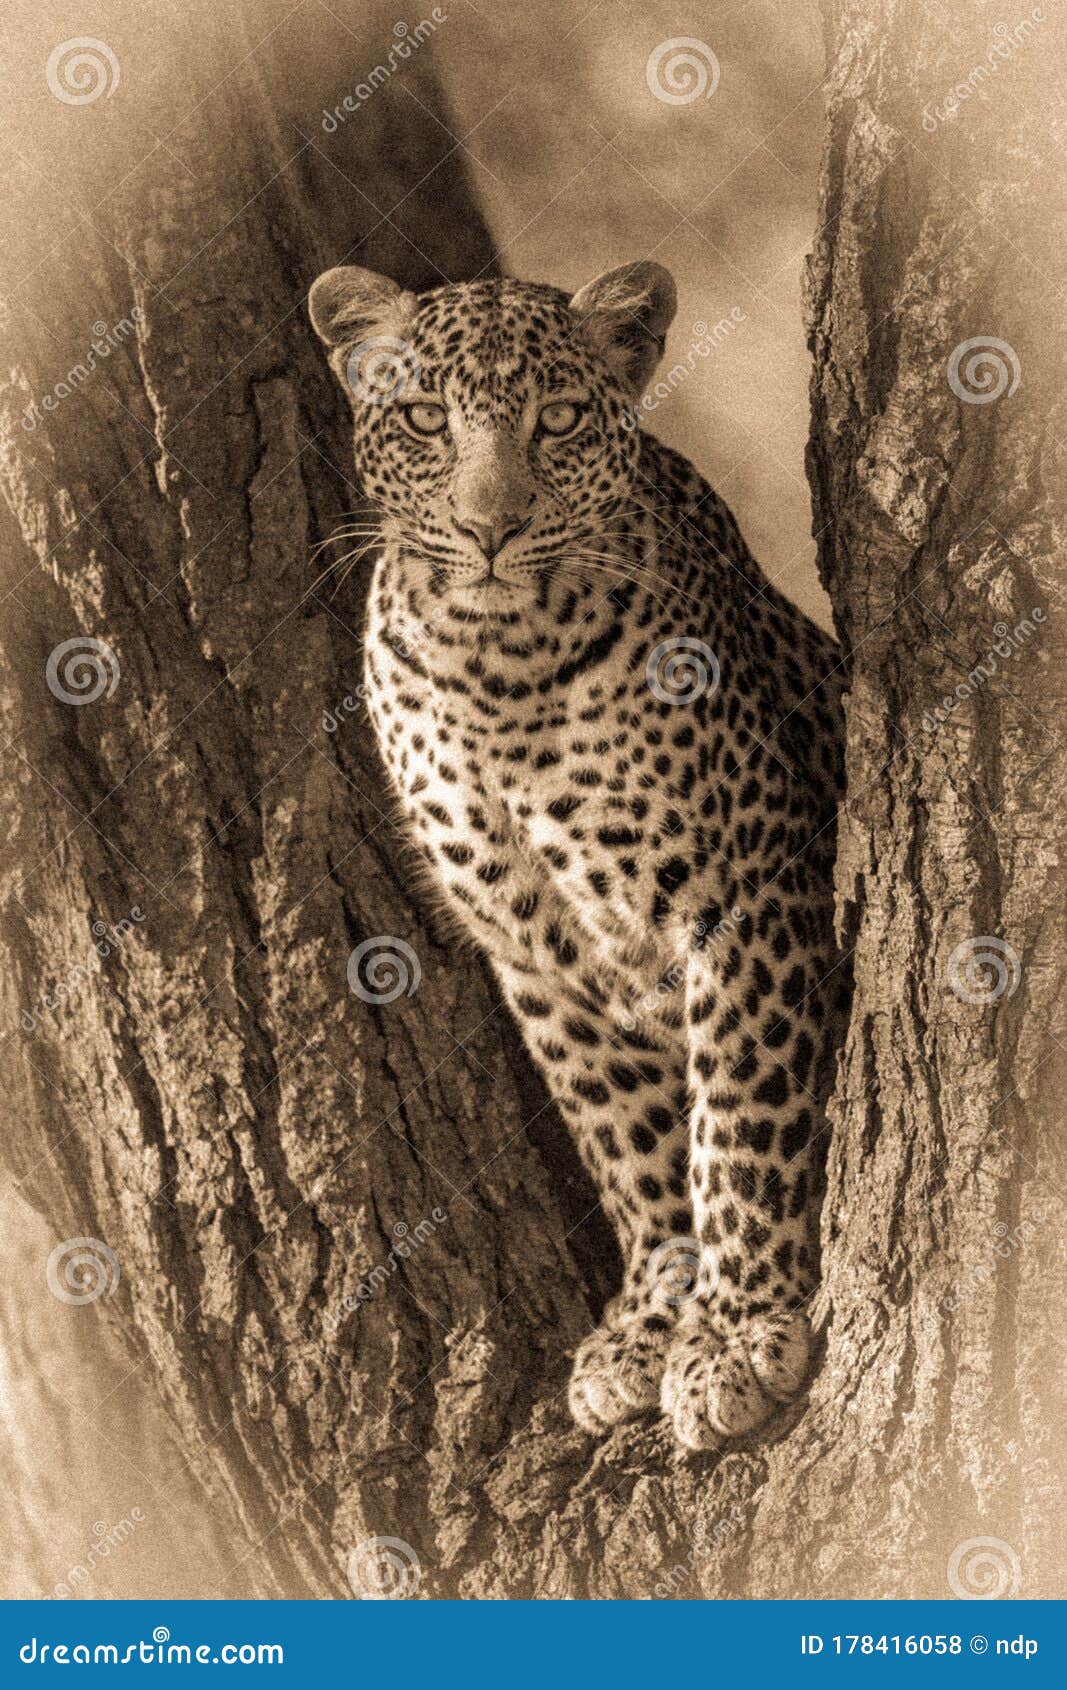 Sepia Leopard Eyeing Camera from Tree Fork Stock Photo - Image of ...